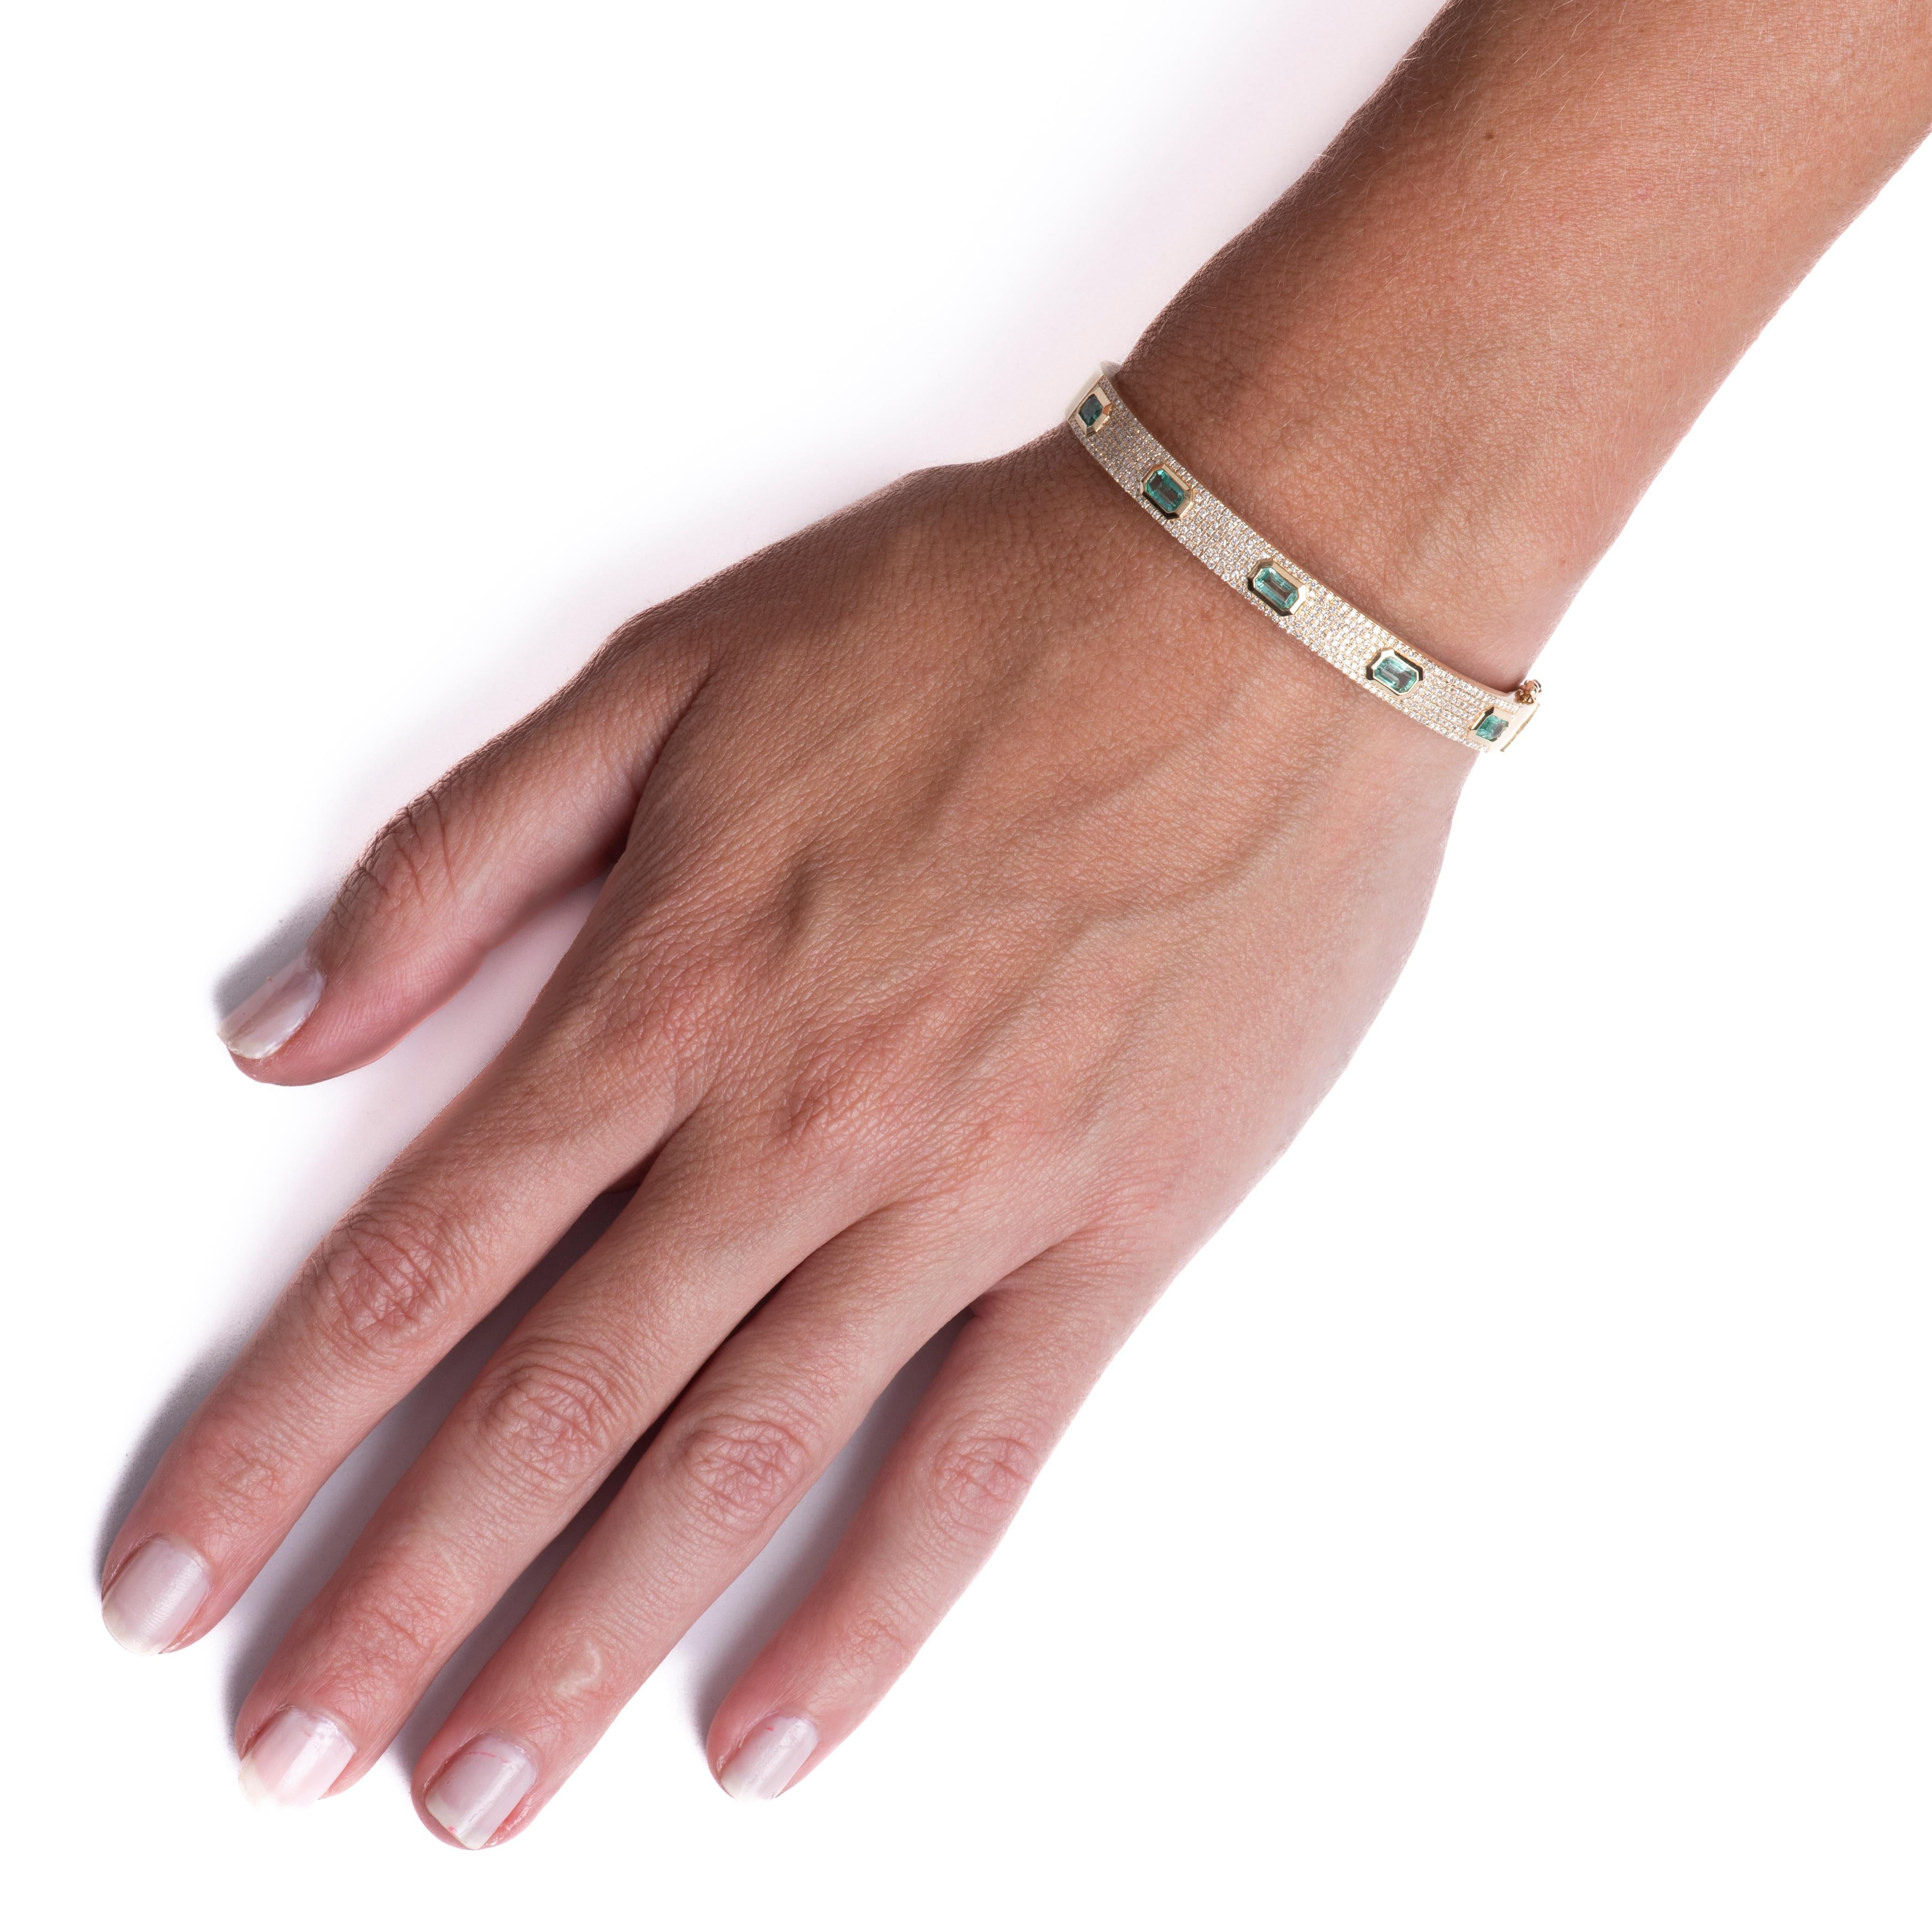 This bangle features five emerald cut emeralds with a total carat weight of 1.47 carats accented by 0.74 carat total weight in round diamonds set in 14 karat yellow gold. Box with safety clasp. Wear alone or layer with your other favorite bracelets.